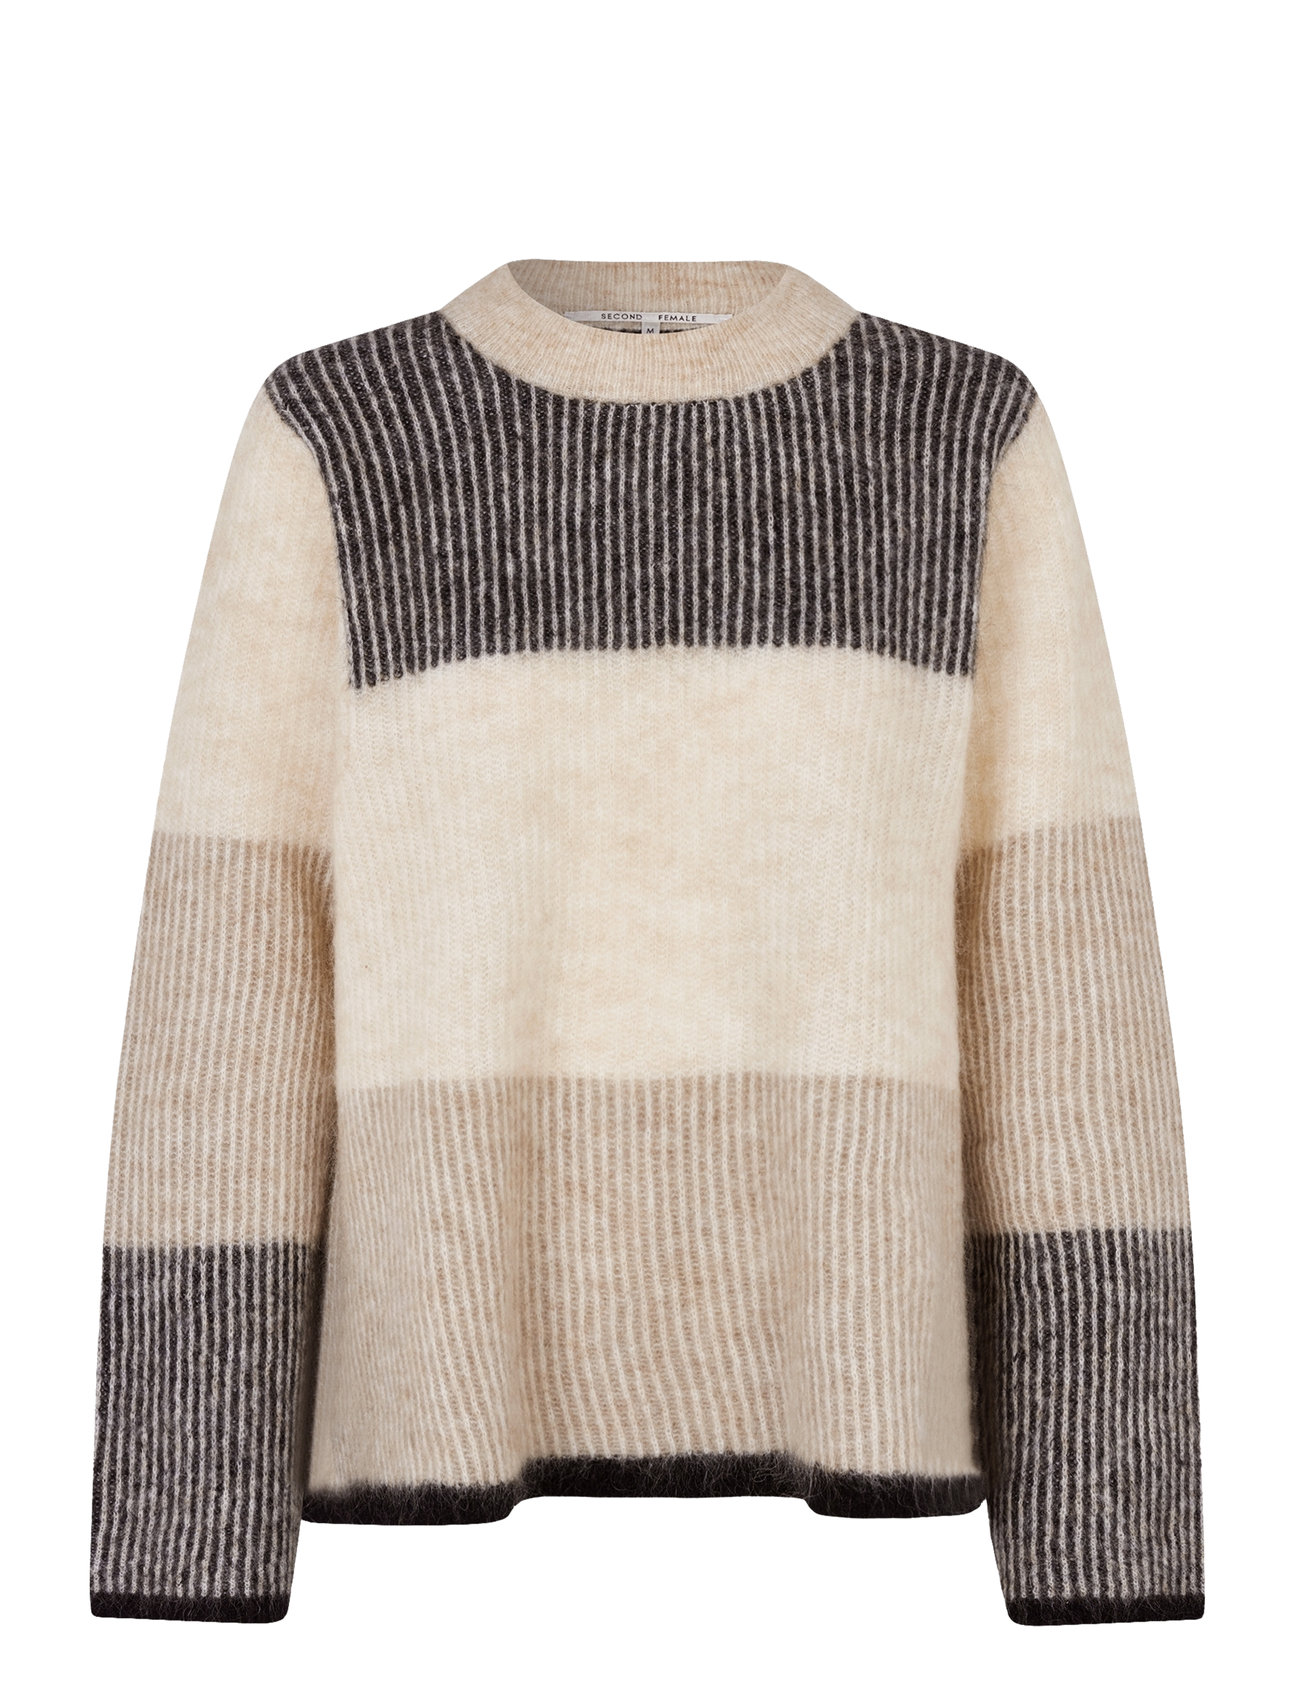 Timma Knit New O-Neck Tops Knitwear Jumpers Beige Second Female